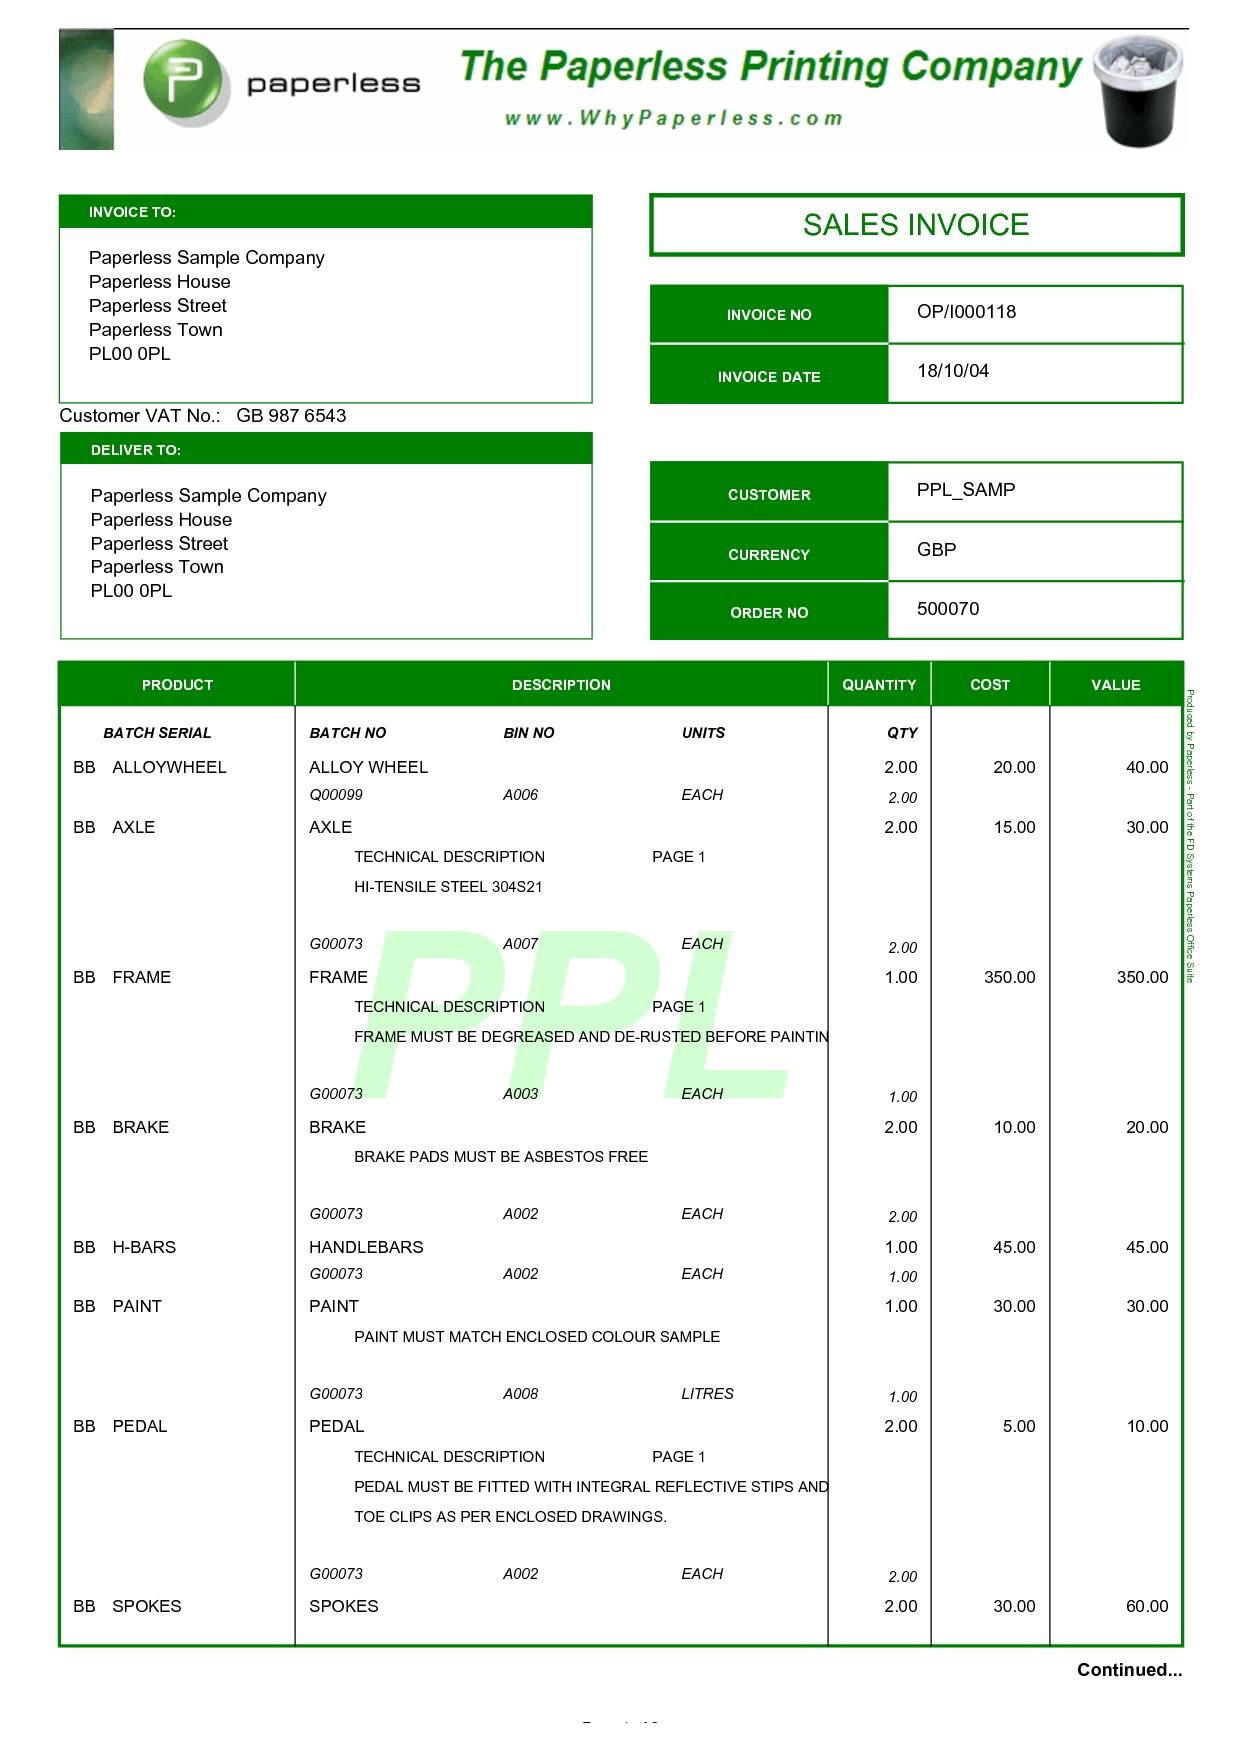 sales invoice example dhuidddynu sample of sales invoice